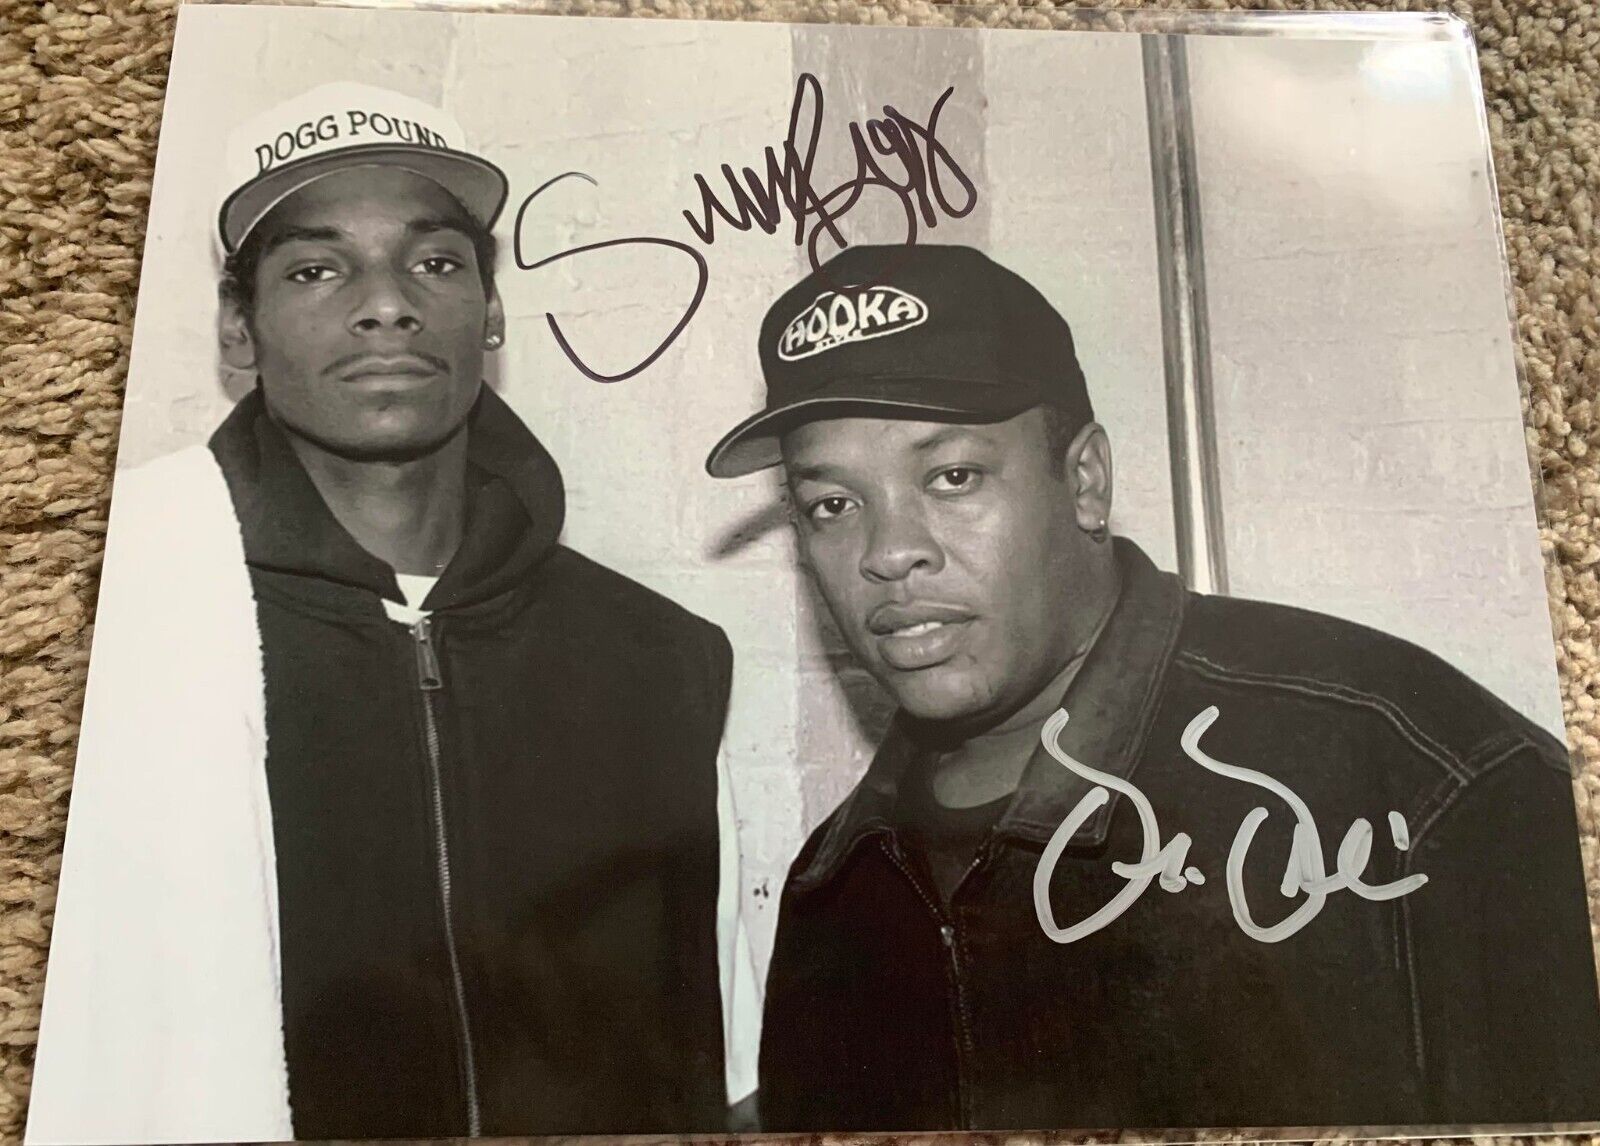 Snoop Dogg and Dr Dre Autographed Photo, 8x10 with COA